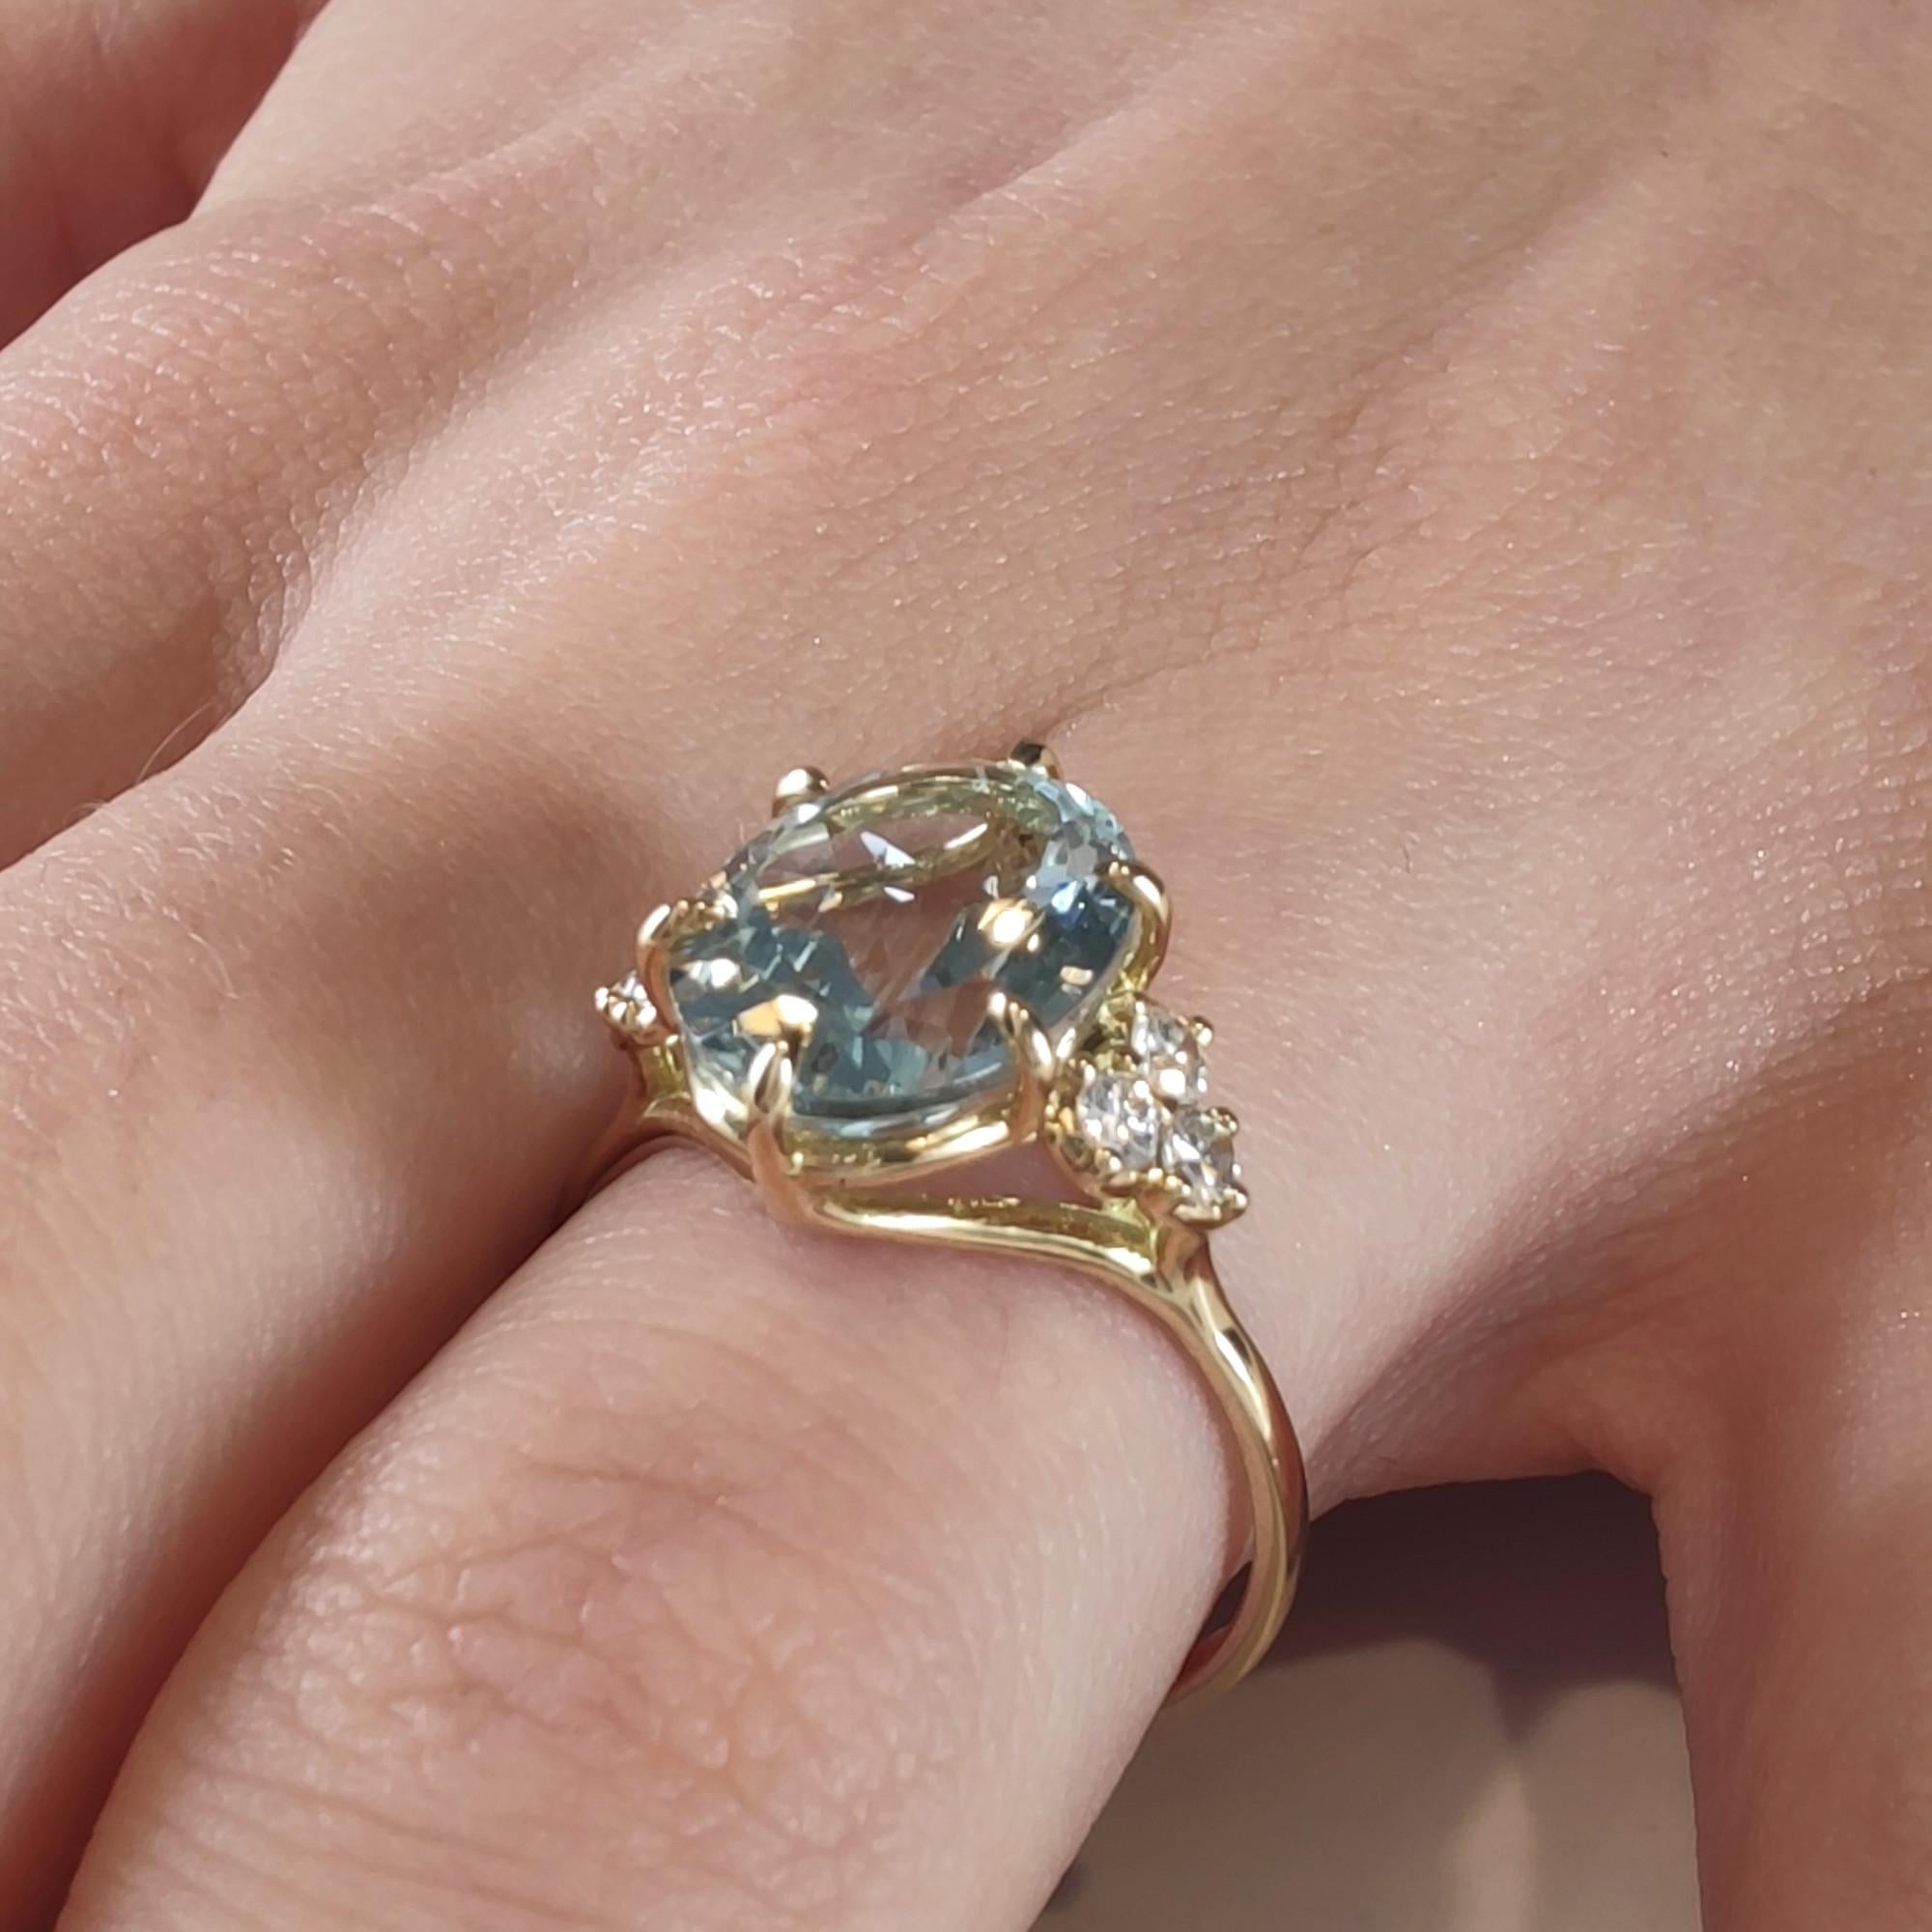 3, 9ct Oval Cut Aquamarine Engagement Ring , 18k Yellow Gold  In New Condition For Sale In Sant Josep de sa Talaia, IB